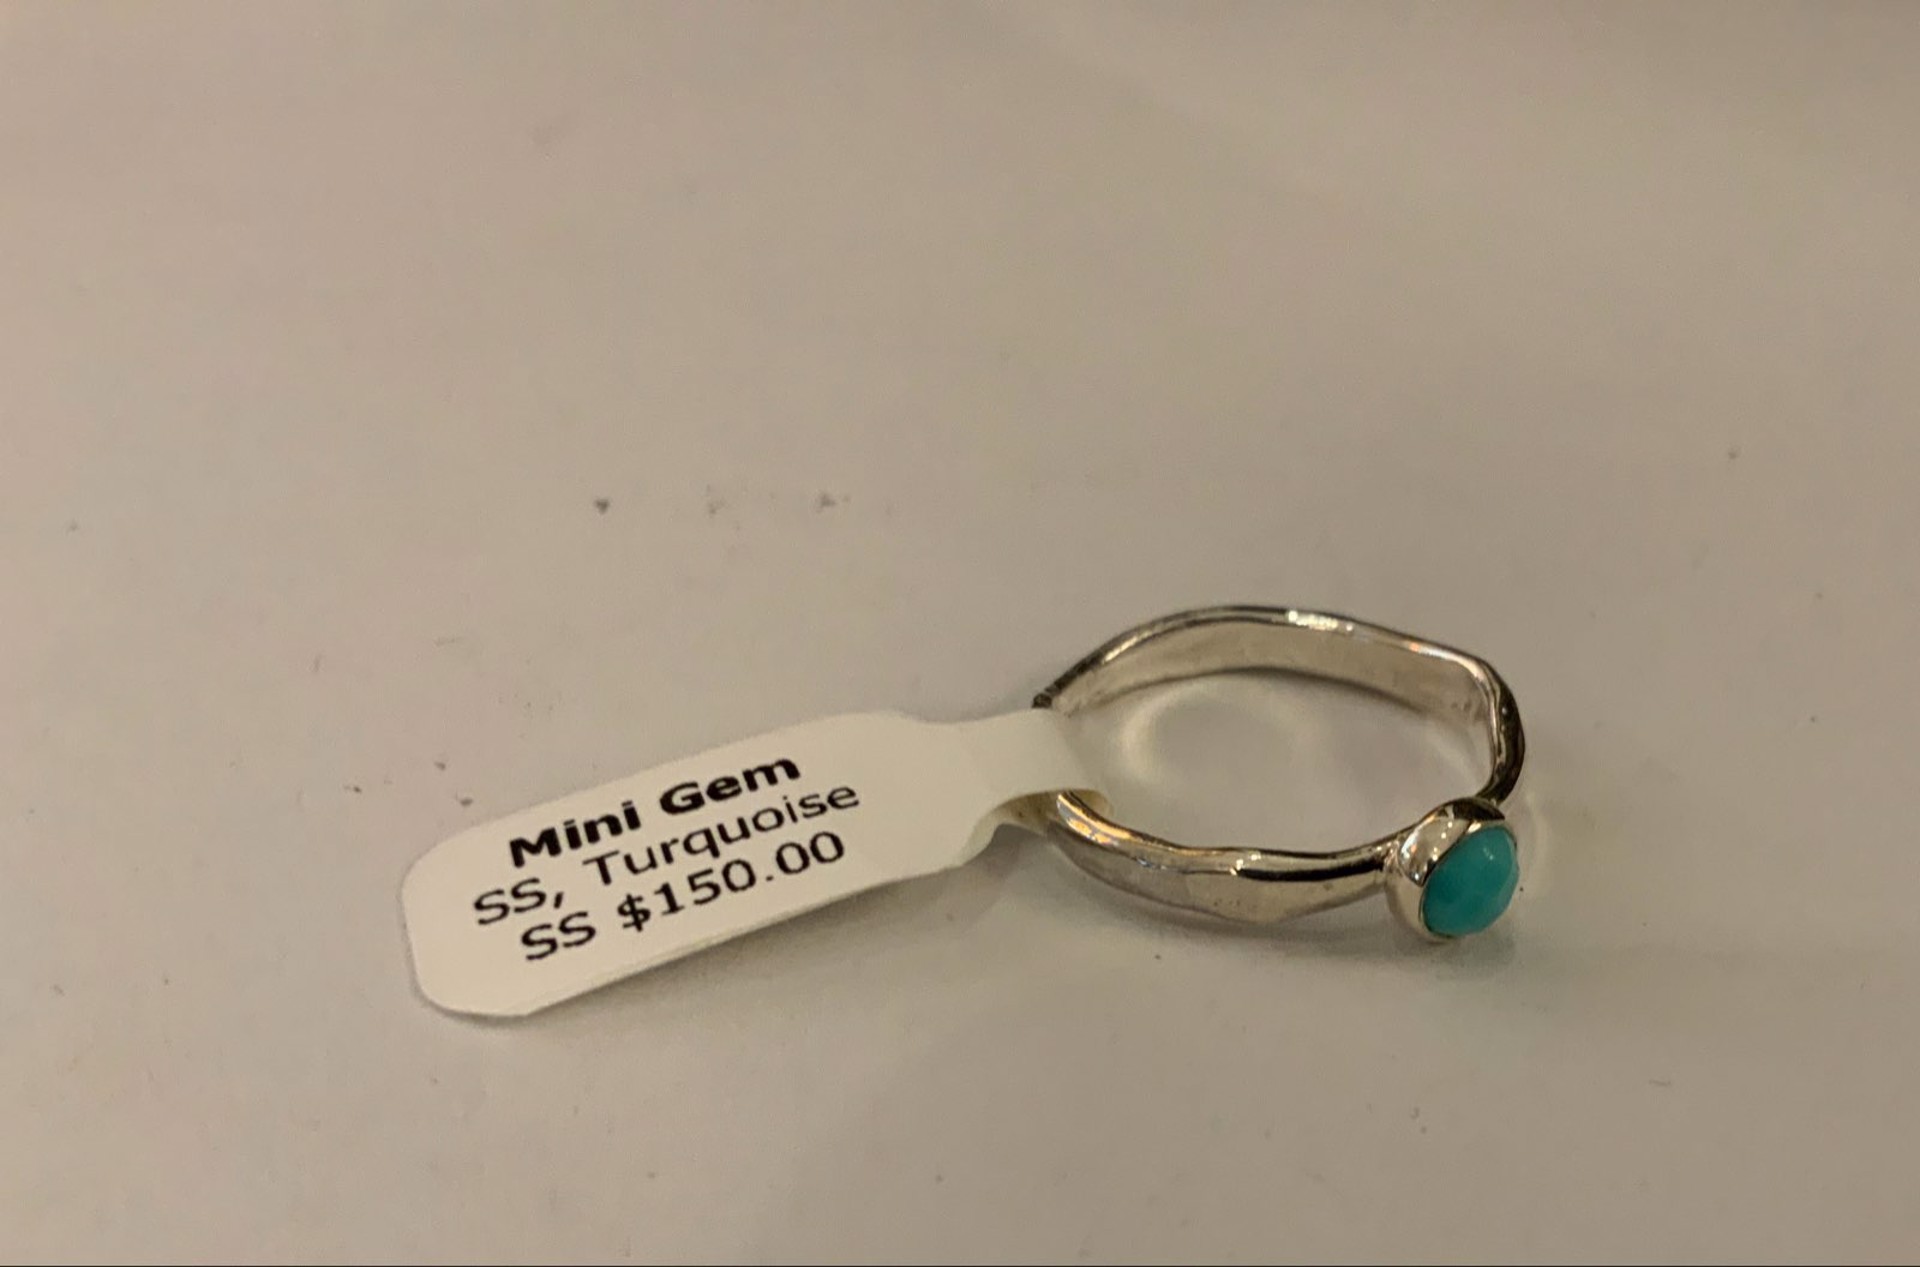 Mini Turquoise Gem Sterling Silver Ring by Kristen Baird